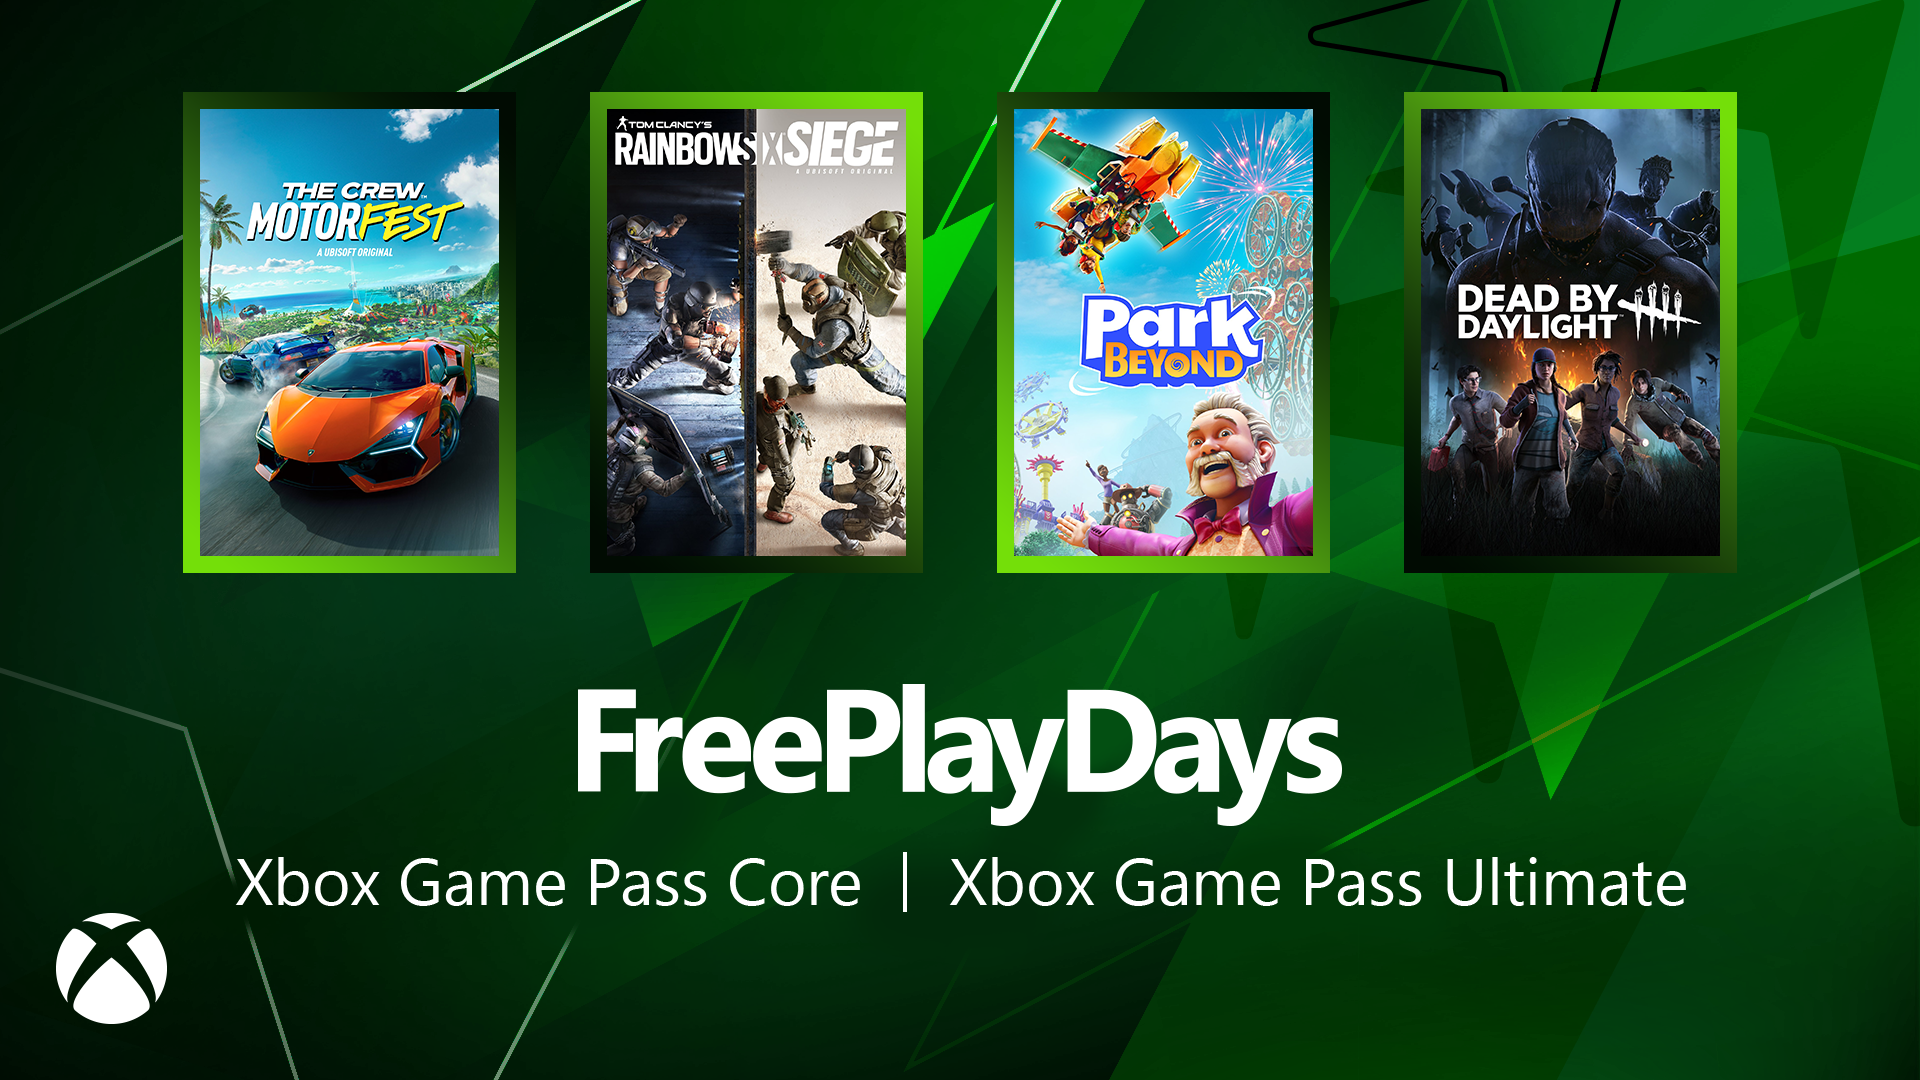 Free Play Days – The Crew Motorfest, Rainbow Six Siege, Park Beyond and Dead by Daylight 